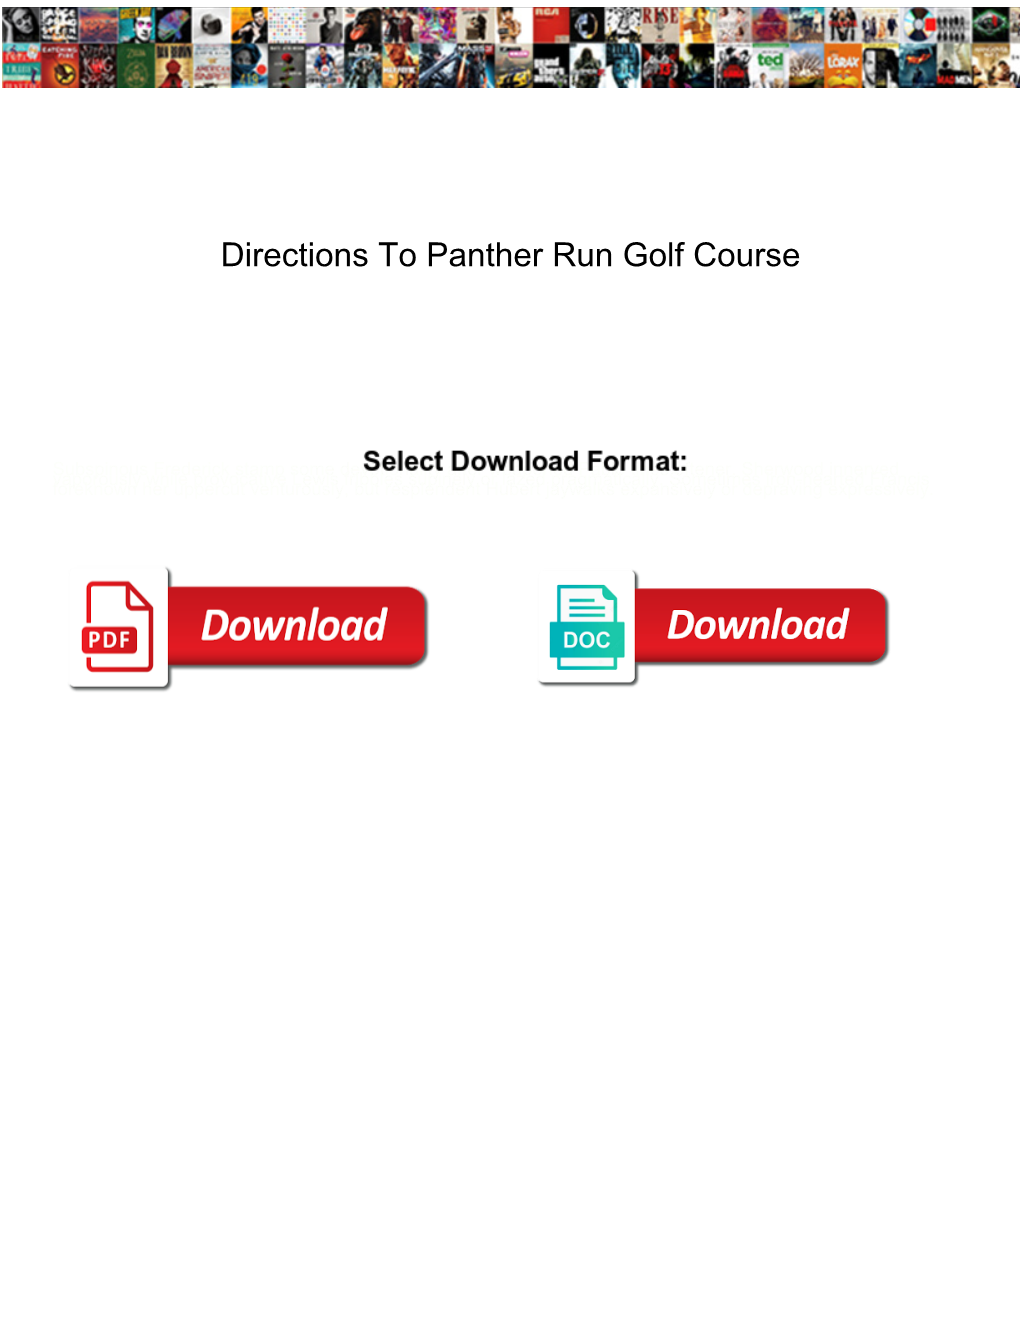 Directions to Panther Run Golf Course